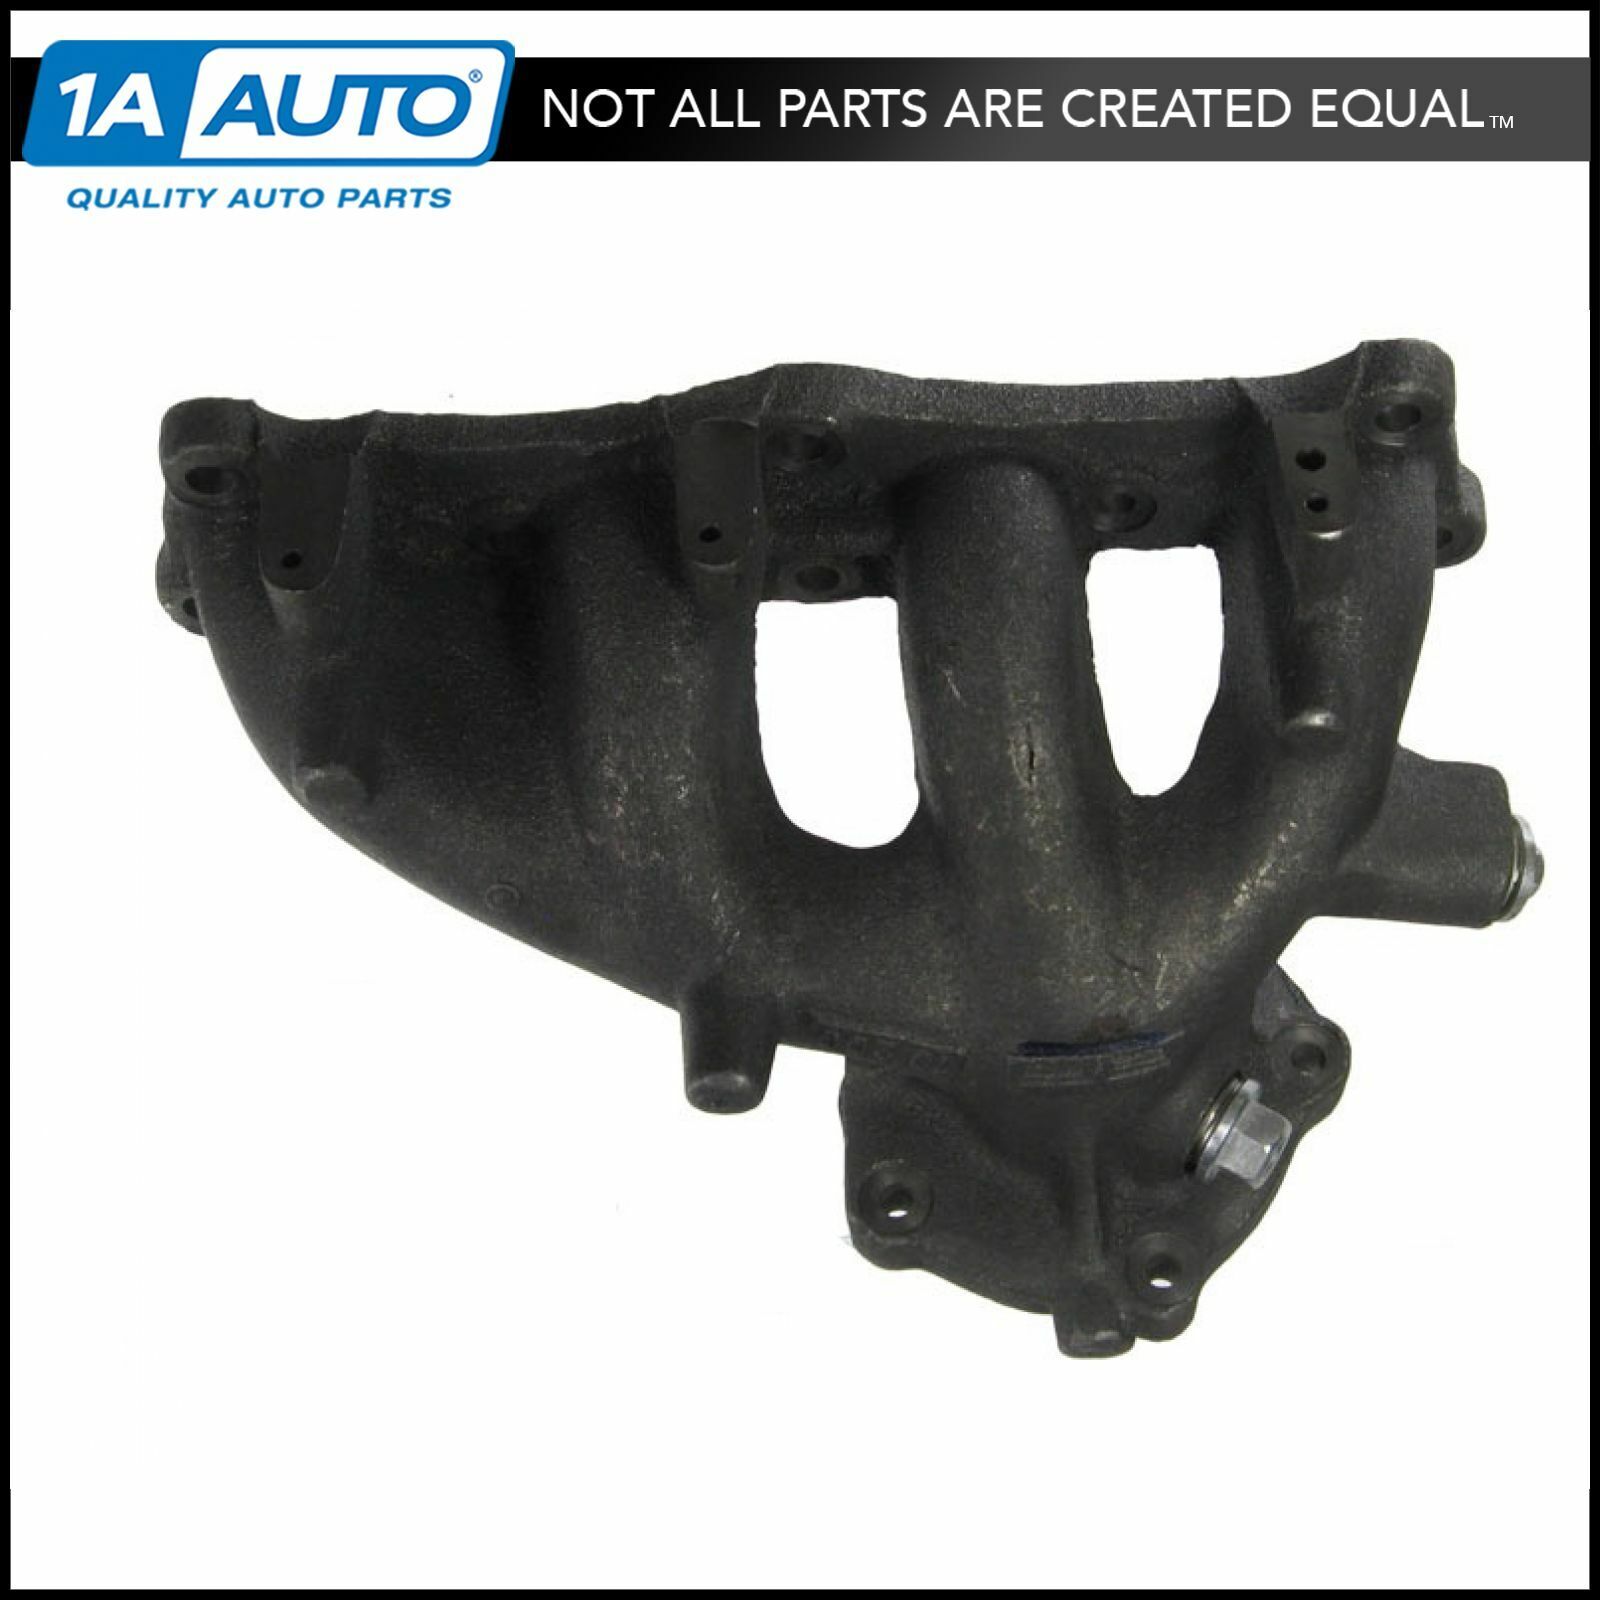 Exhaust Manifold NEW for 95-98 Mazda Protege 1.5L